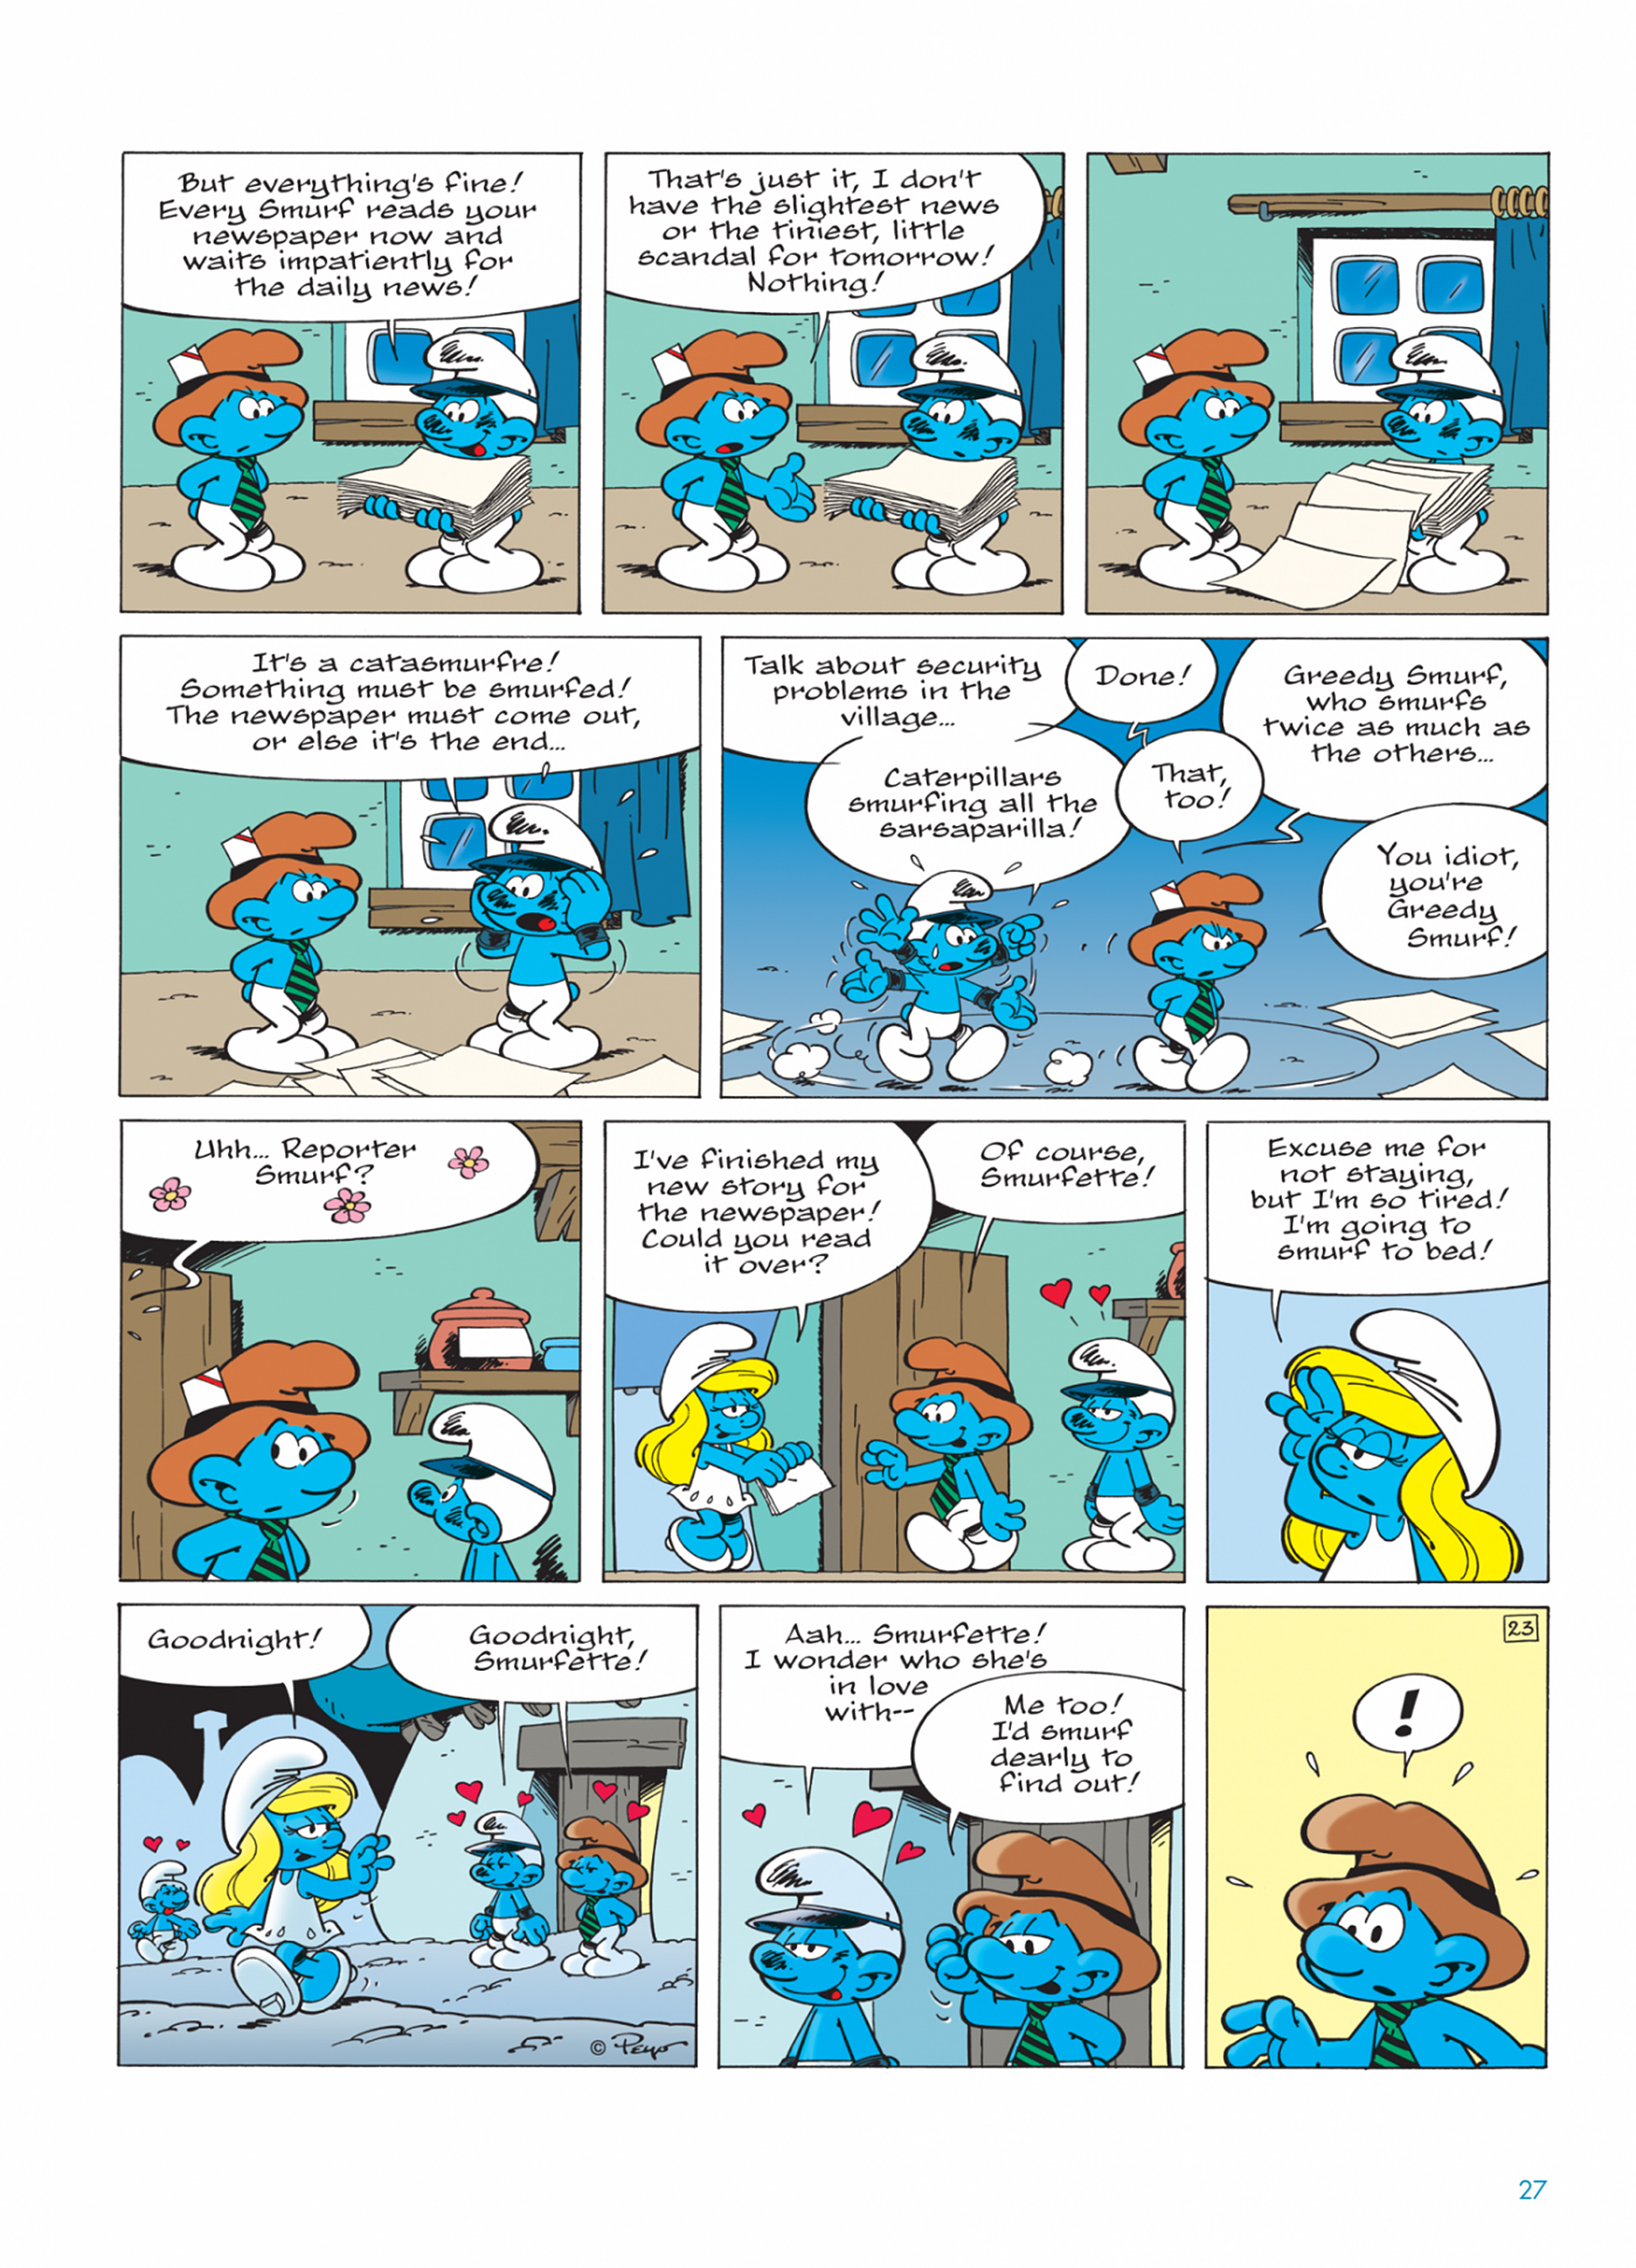 Read online The Smurfs comic -  Issue #24 - 27